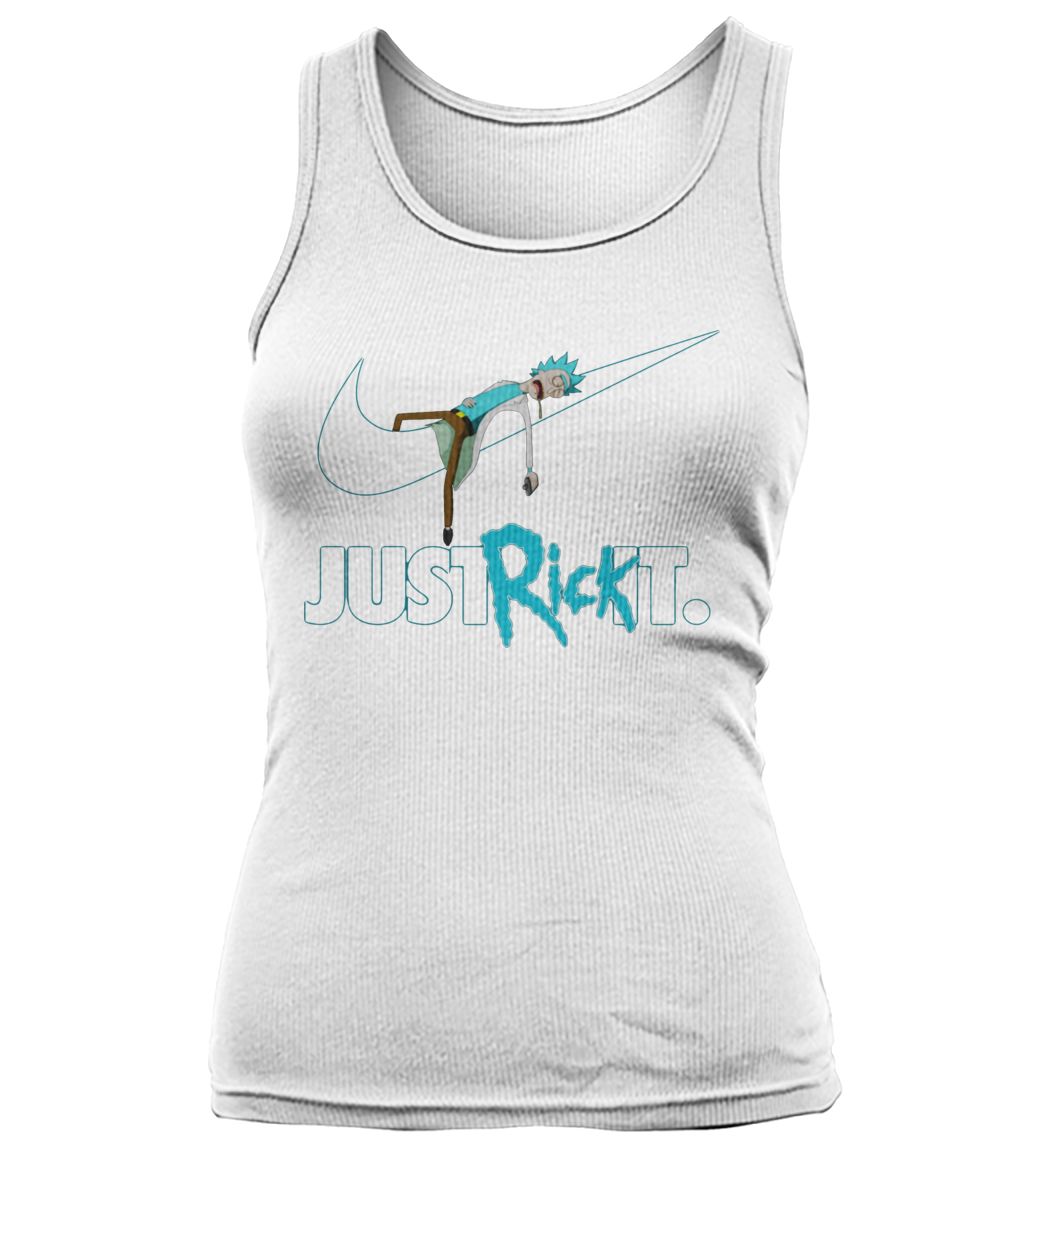 Rick and morty just rick it women's tank top